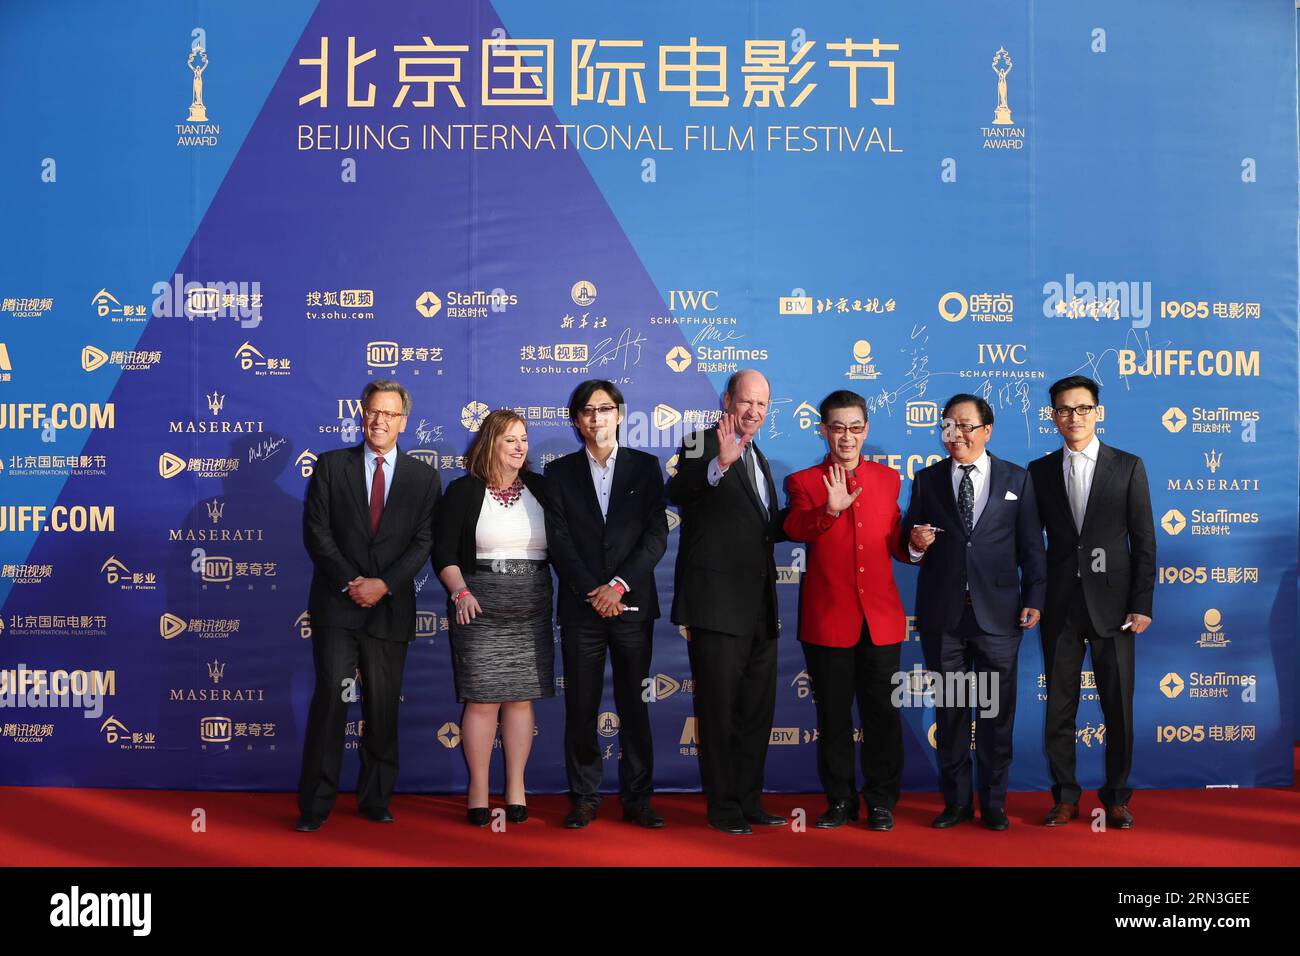 (150416) -- BEIJING, April 16, 2015 -- Chinese actor Zhang Jinlai (stage named Liuxiao Lingtong, 3rd R), Ma Dehua (2nd R) and other crew members of the movie Journey To the West walk the red carpet during the opening ceremony of the fifth Beijing International Film Festival (BJIFF) in Beijing, capital of China, April 16, 2015. The BJIFF kicks off Thursday and will last until April 23. ) (mt) CHINA-BEIJING-FILM FESTIVAL-OPENING (CN) XingxGuangli PUBLICATIONxNOTxINxCHN   Beijing April 16 2015 Chinese Actor Zhang  Stage Named   3rd r MA Dehua 2nd r and Other Crew Members of The Movie Journey to T Stock Photo